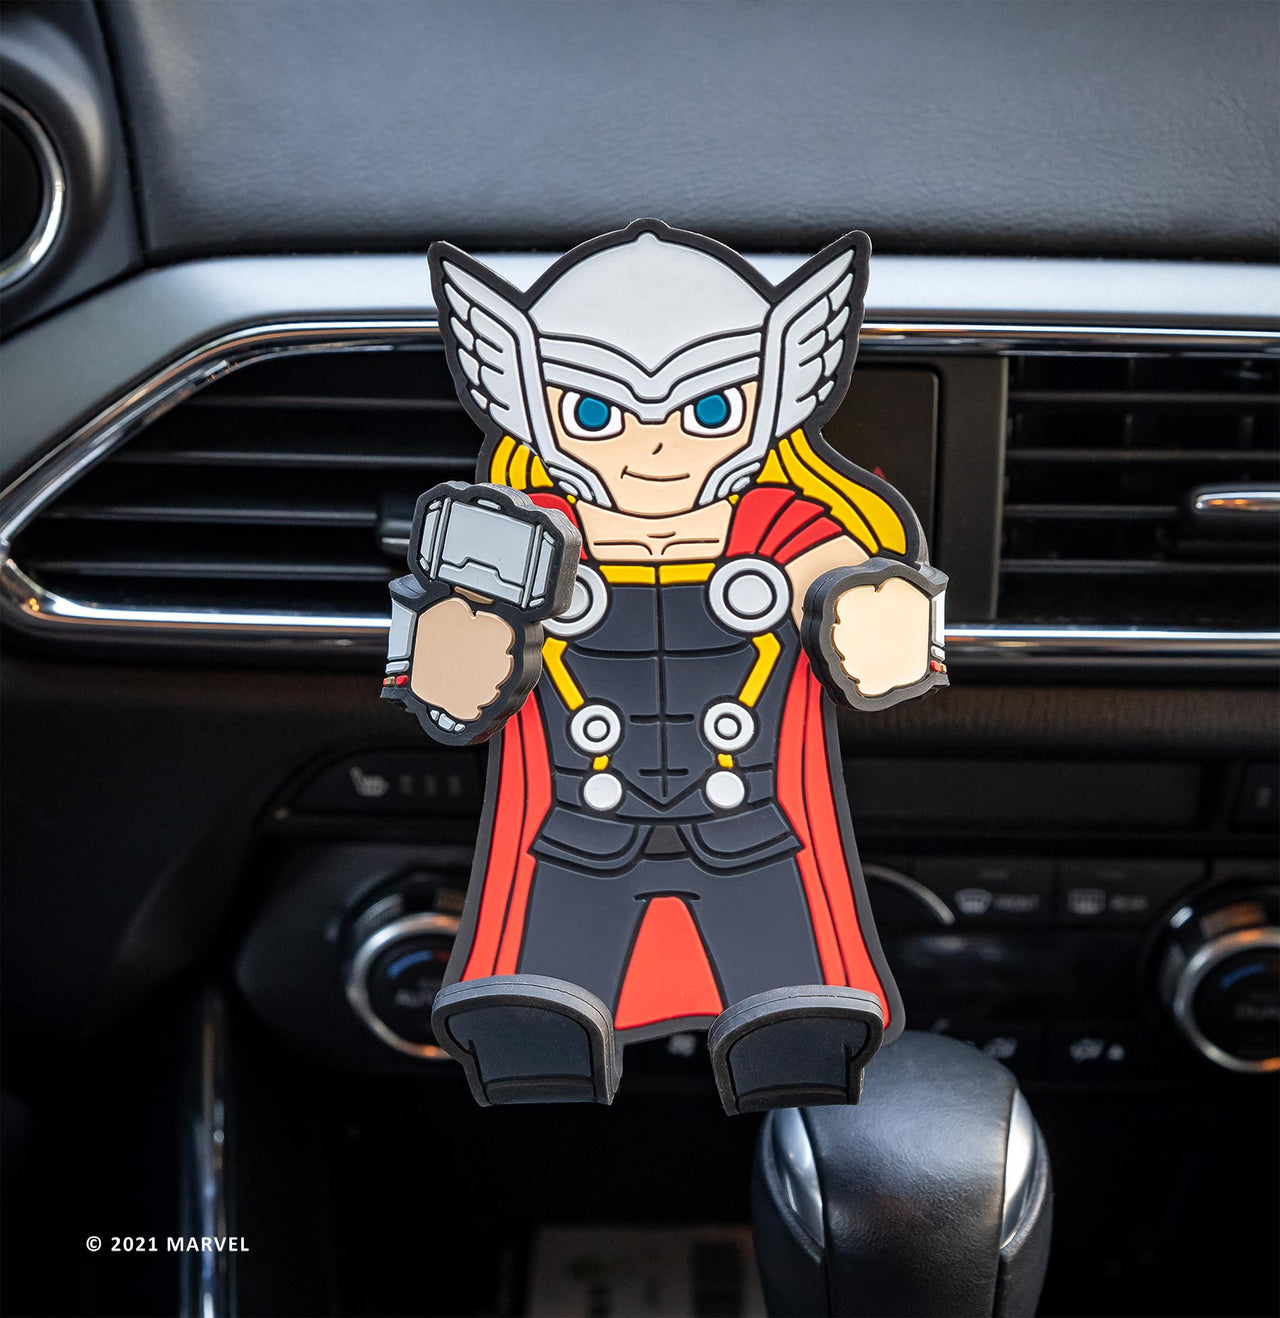 Image of Marvel Comics Thor Hug Buddy  attached to a car air vent with arms and legs folded in, ready to accept your phone or smart device and guide you on your next adventure